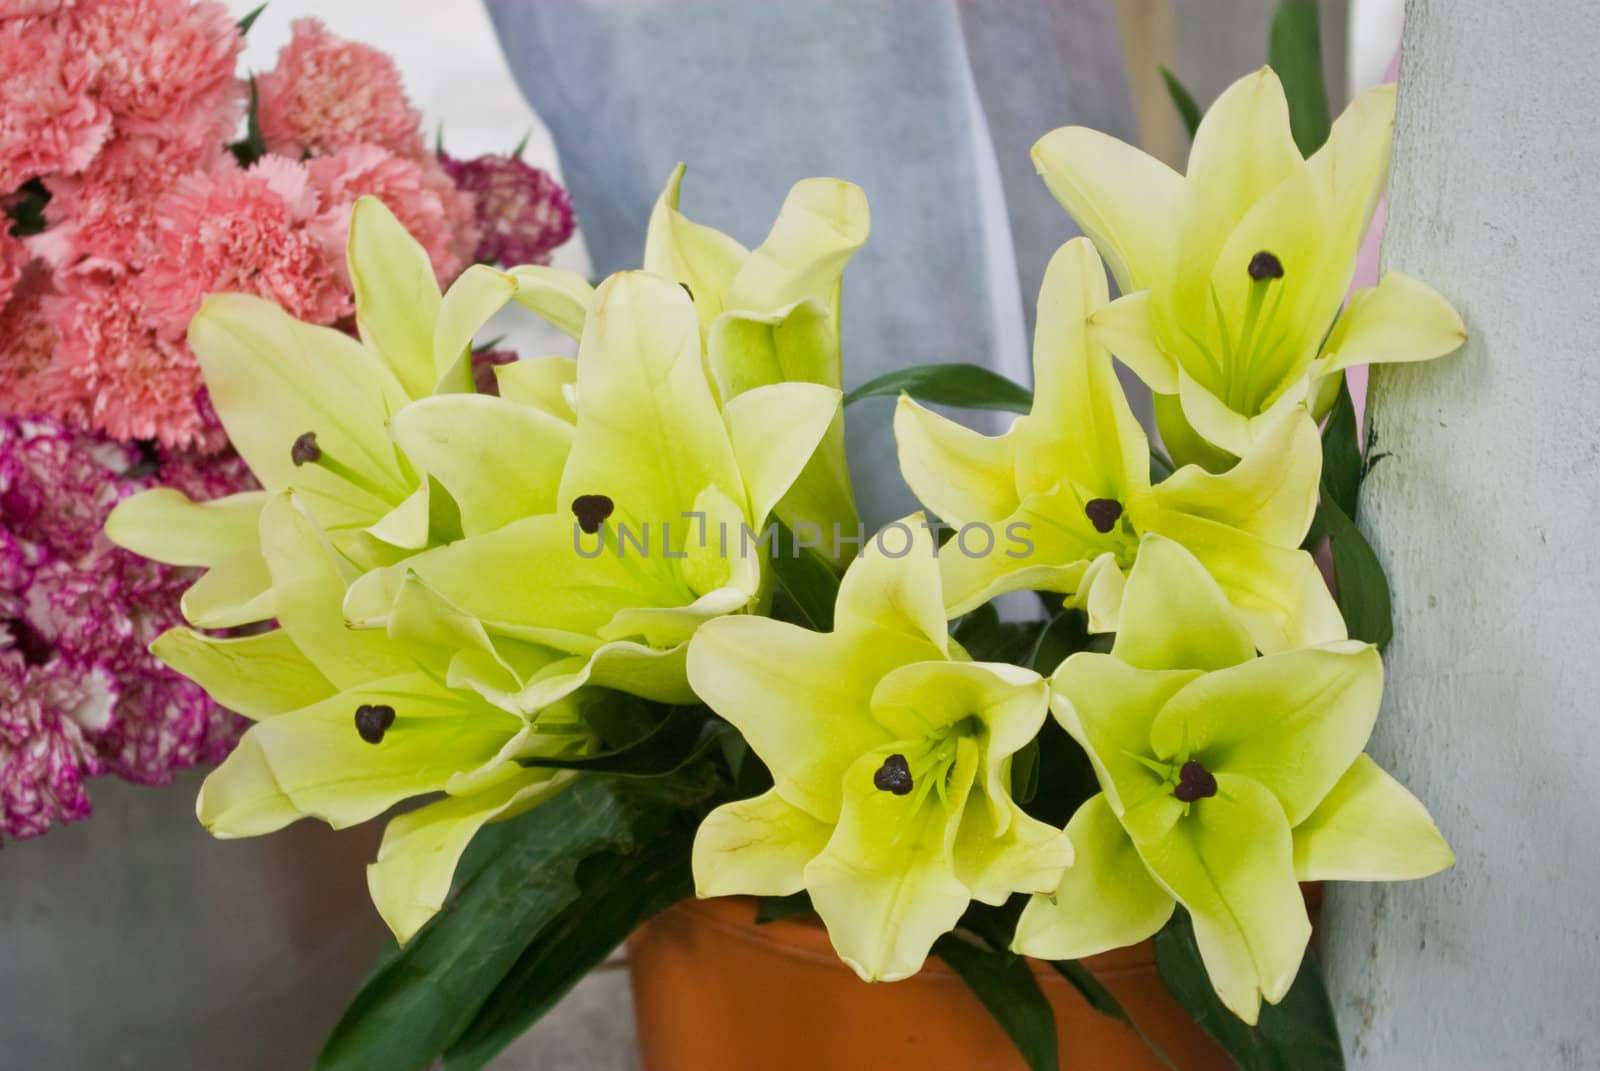 Lily fower in the pot, Flower backgrround